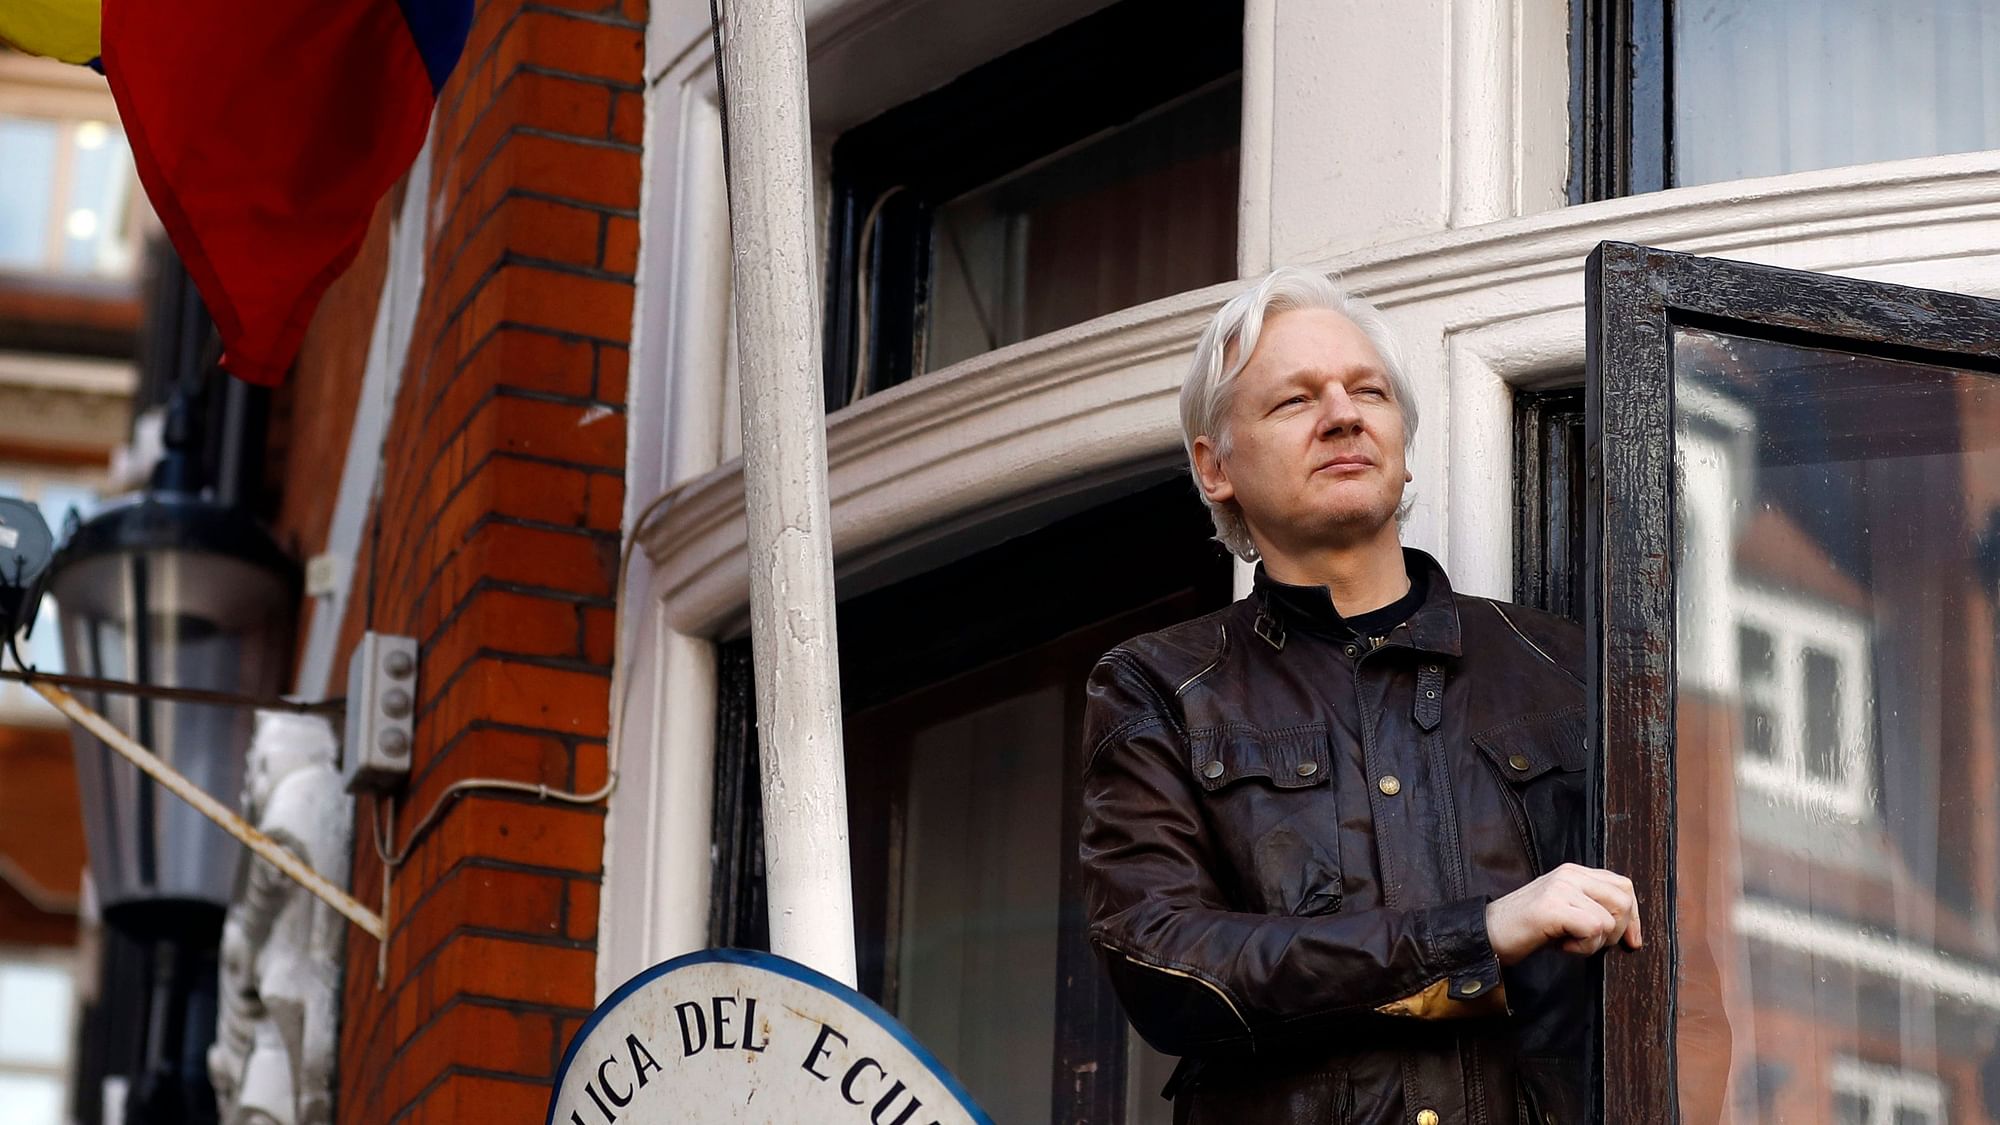  WikiLeaks founder Julian Assange looks out from the balcony while claiming political asylum at the Ecuadorian embassy in London.&nbsp;